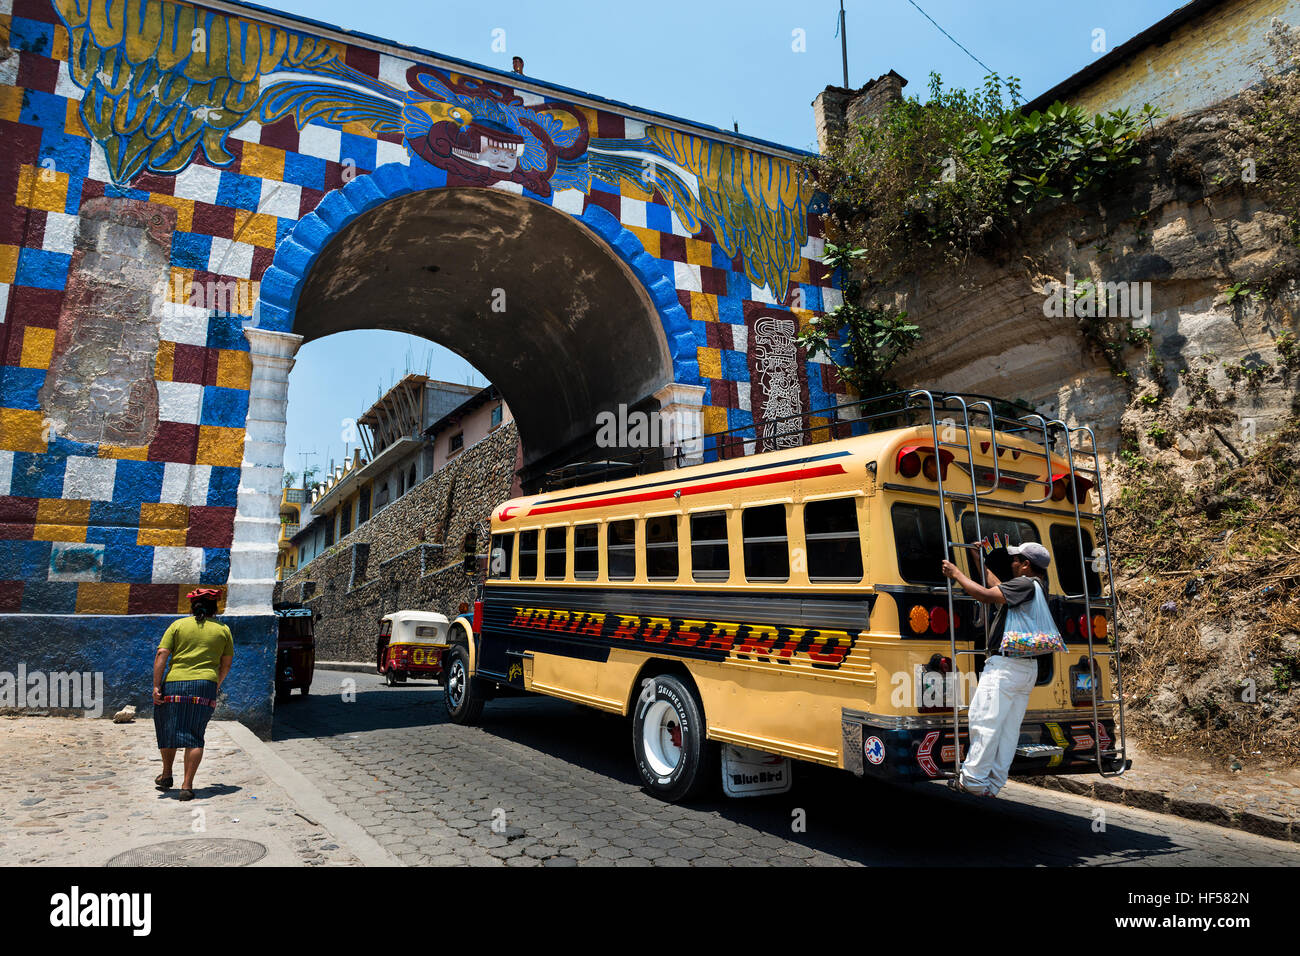 Chichicastenango, Guatemala - April 26, 2014: Bus with one man holding to a bar in the back entering the town of Chichicastenango, in Guatemala Stock Photo